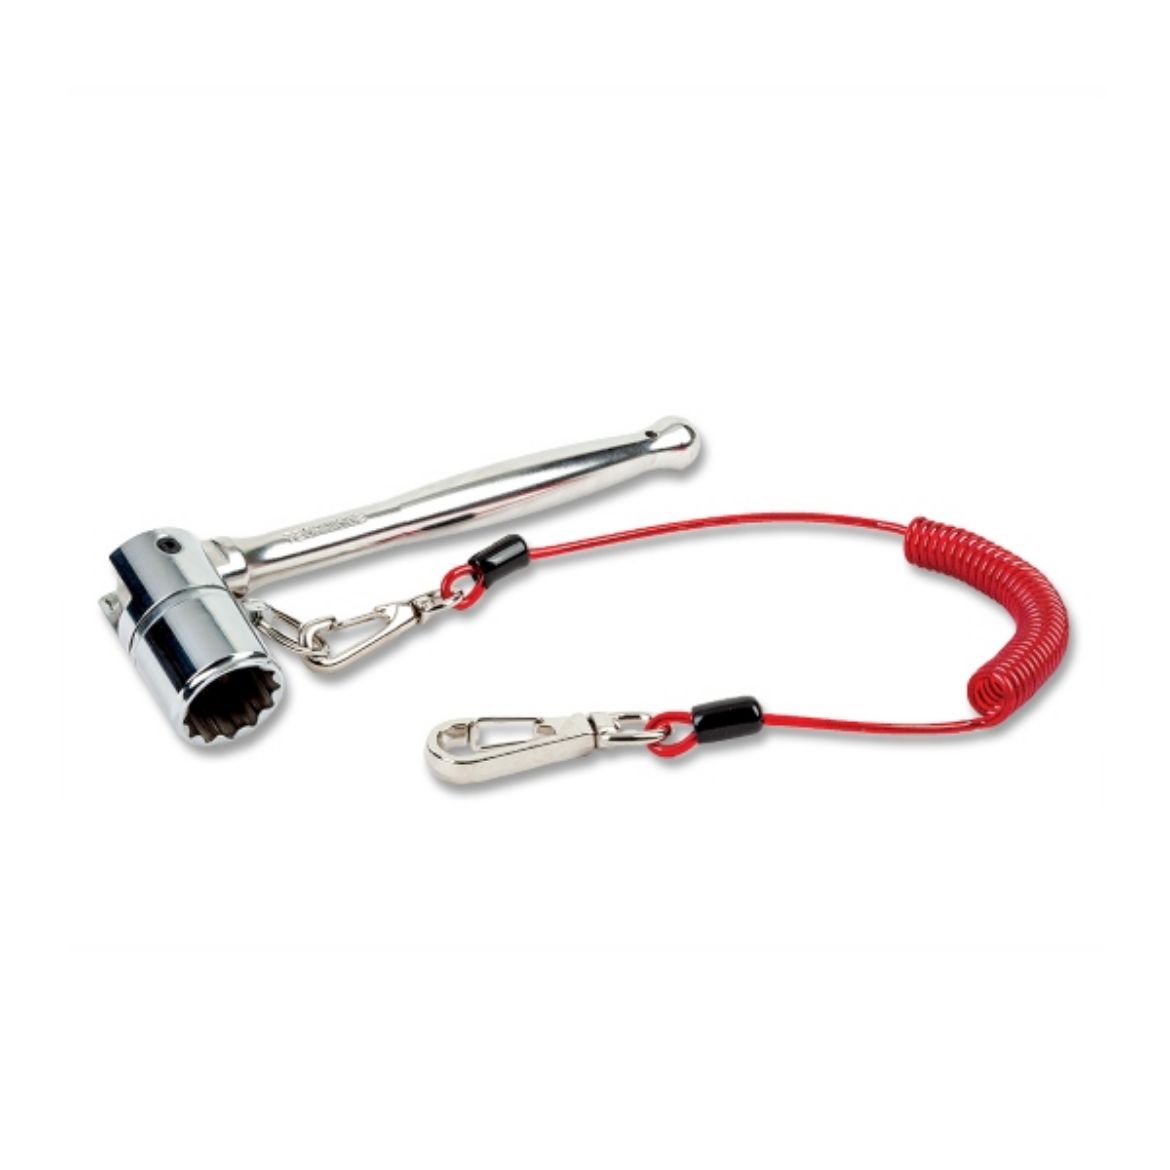 Picture of STAINLESS STEEL SCAFFOLD KEY 7/16 WITH COIL SINGLE-ACTION TETHER